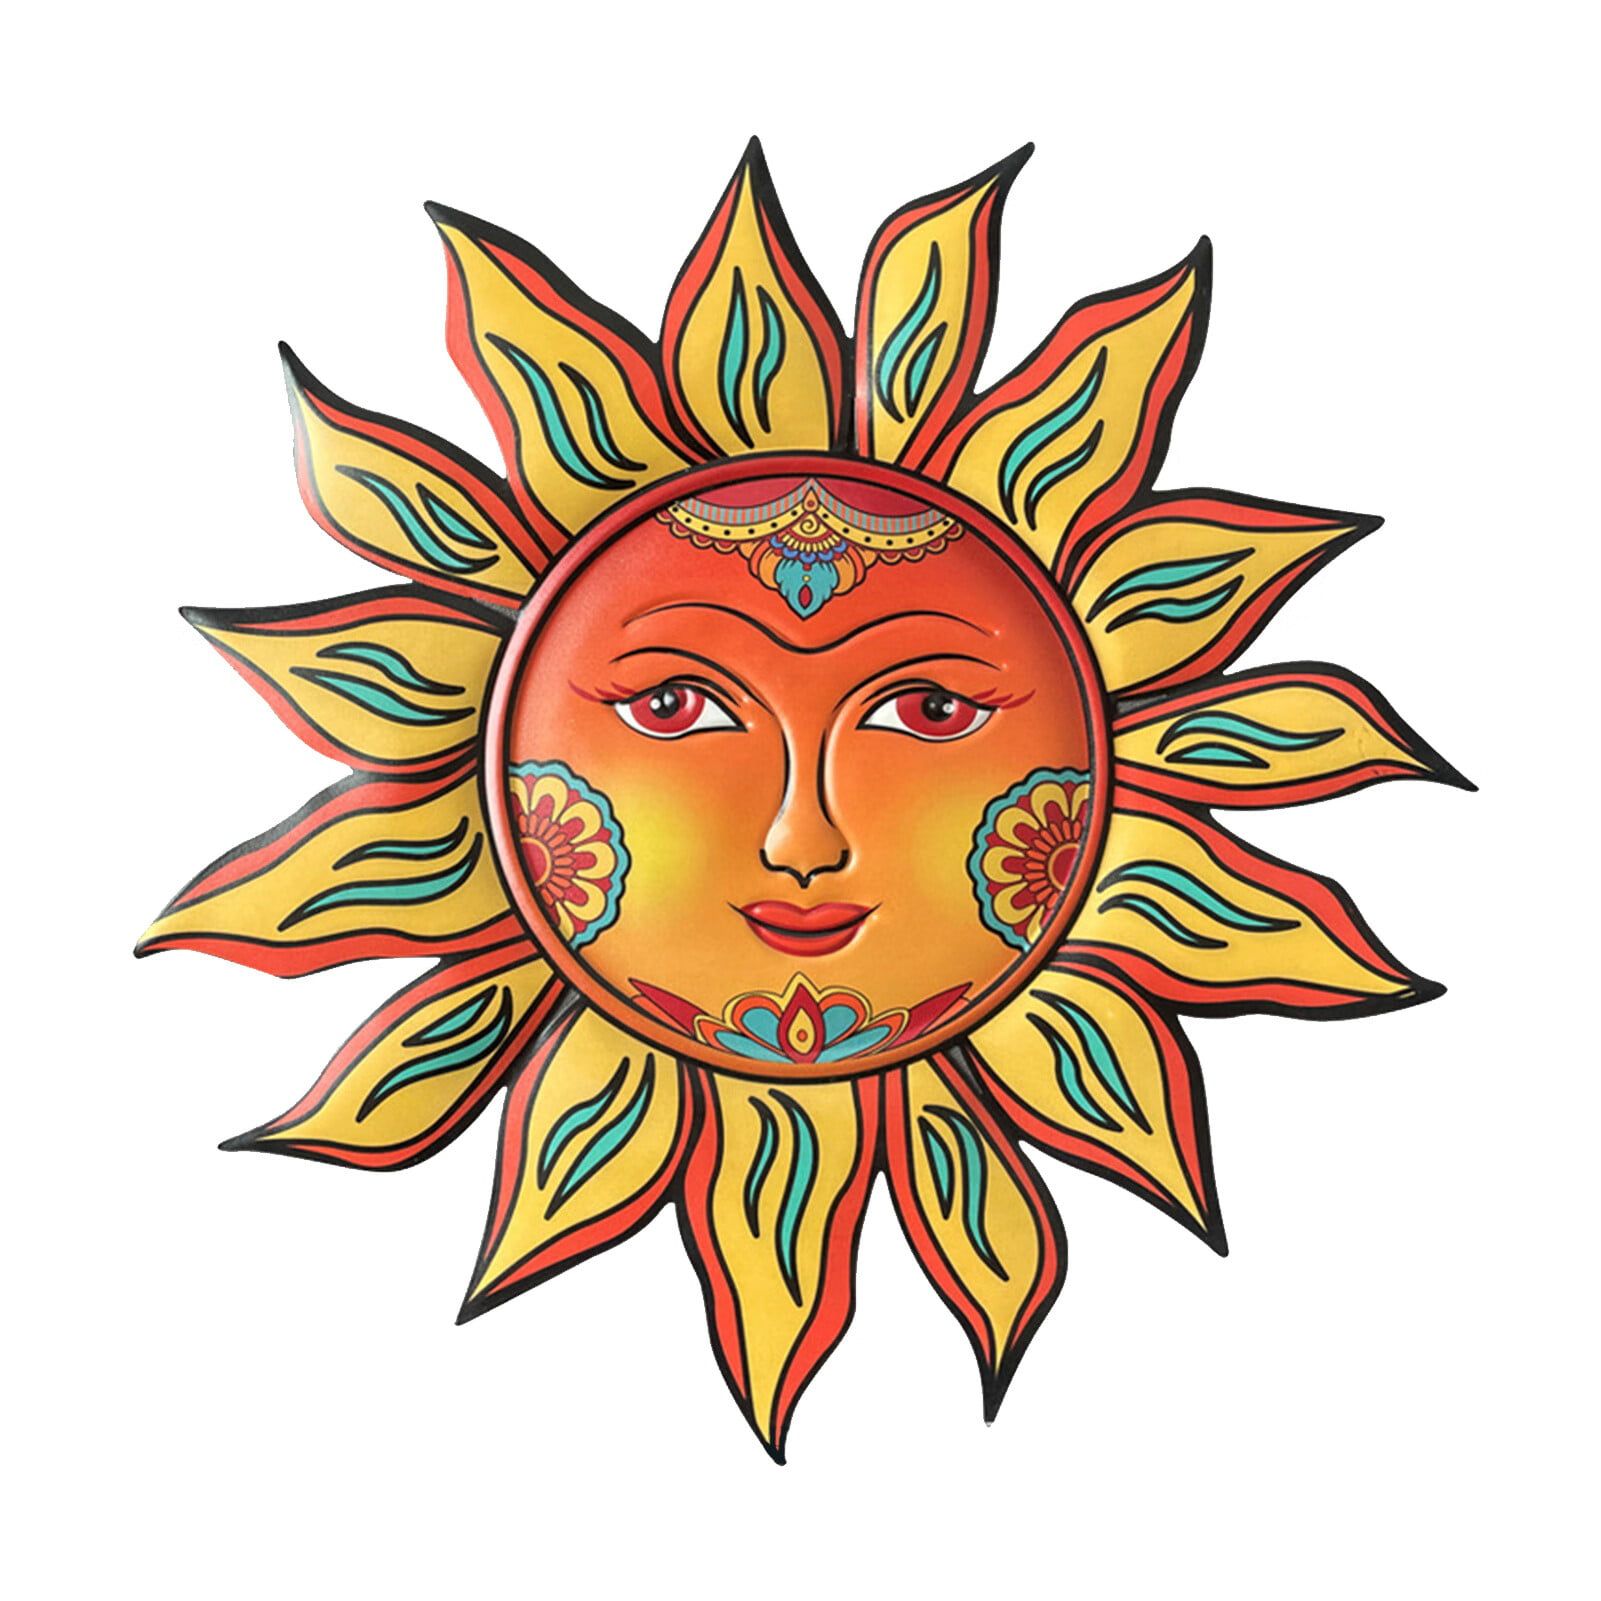 Metal Sun Wall Decor Outdoor | Sun Face Iron Outdoor Wall Decor With Hook |  3d Sun Face Wall Art Decorations For Garden, Patio, Fence, House –  Walmart In Most Current Sun Face Metal Wall Art (View 12 of 20)